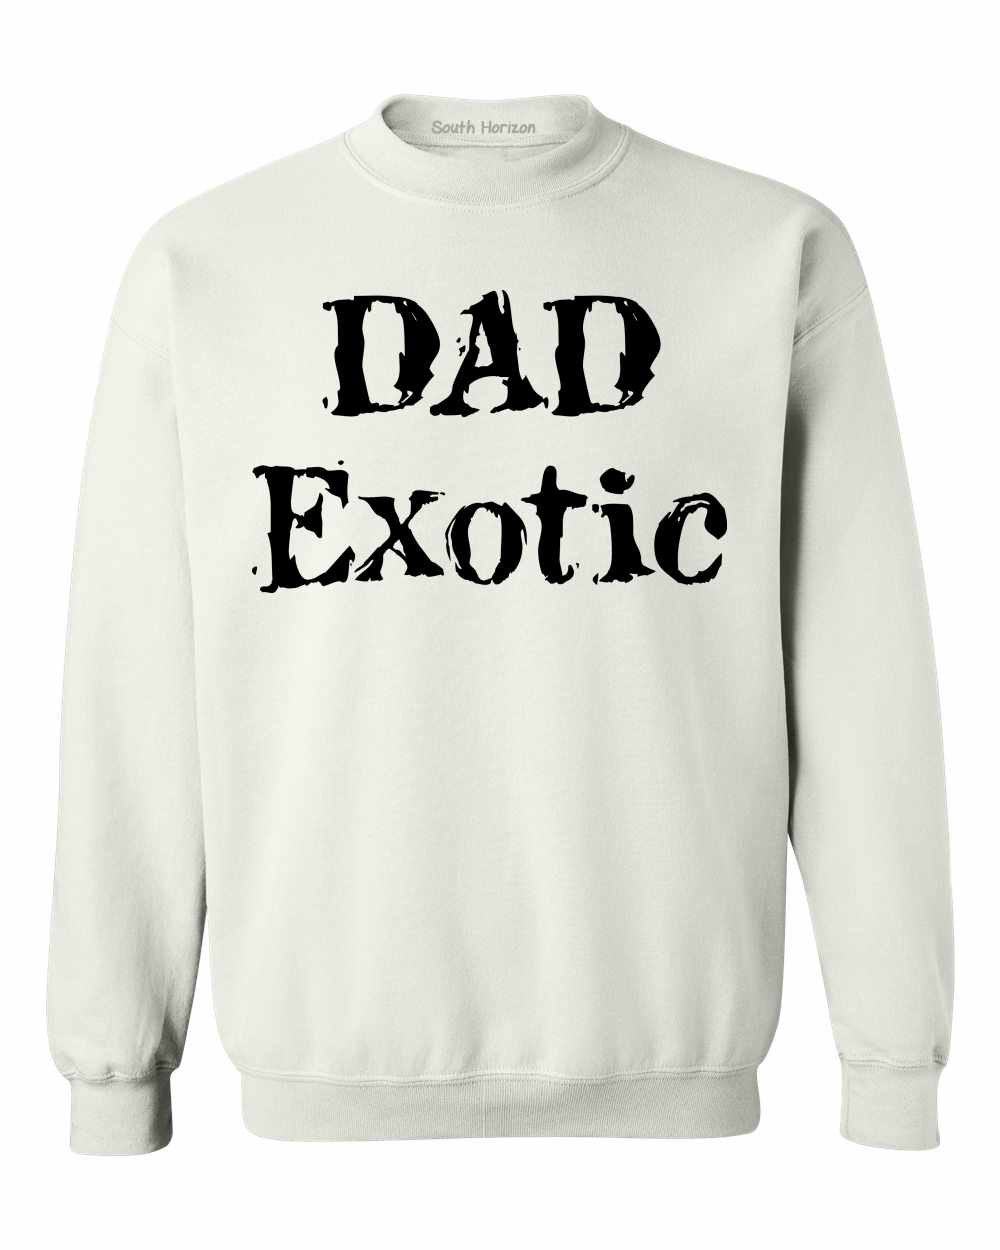 DAD EXOTIC funny Fathers Day Birthday Shirt Sweat Shirt